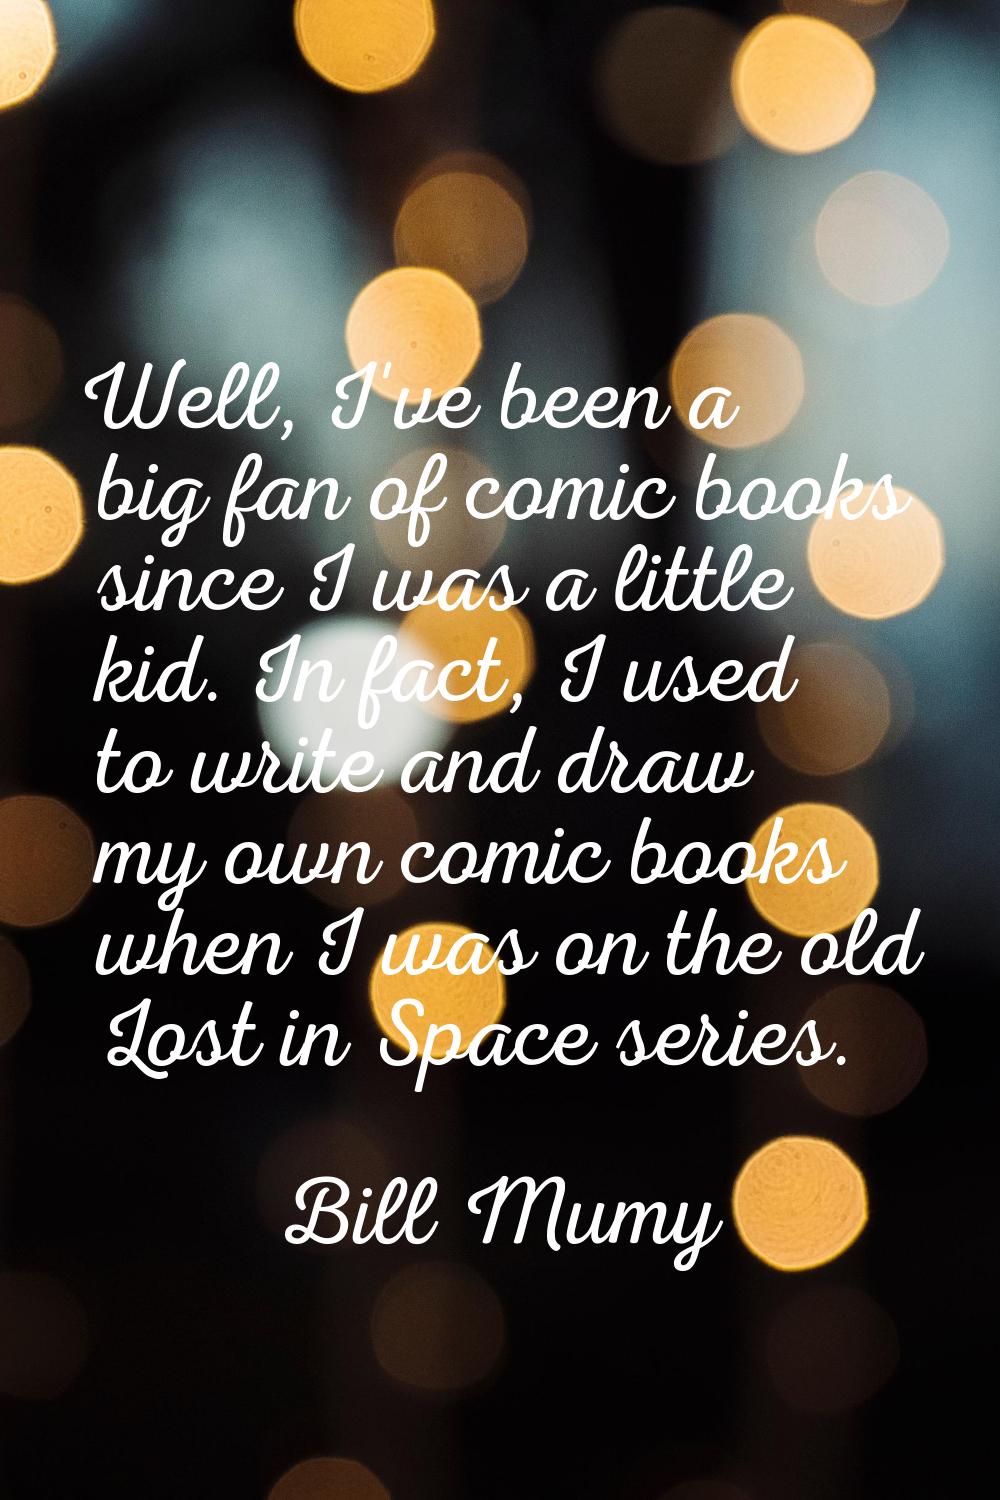 Well, I've been a big fan of comic books since I was a little kid. In fact, I used to write and dra